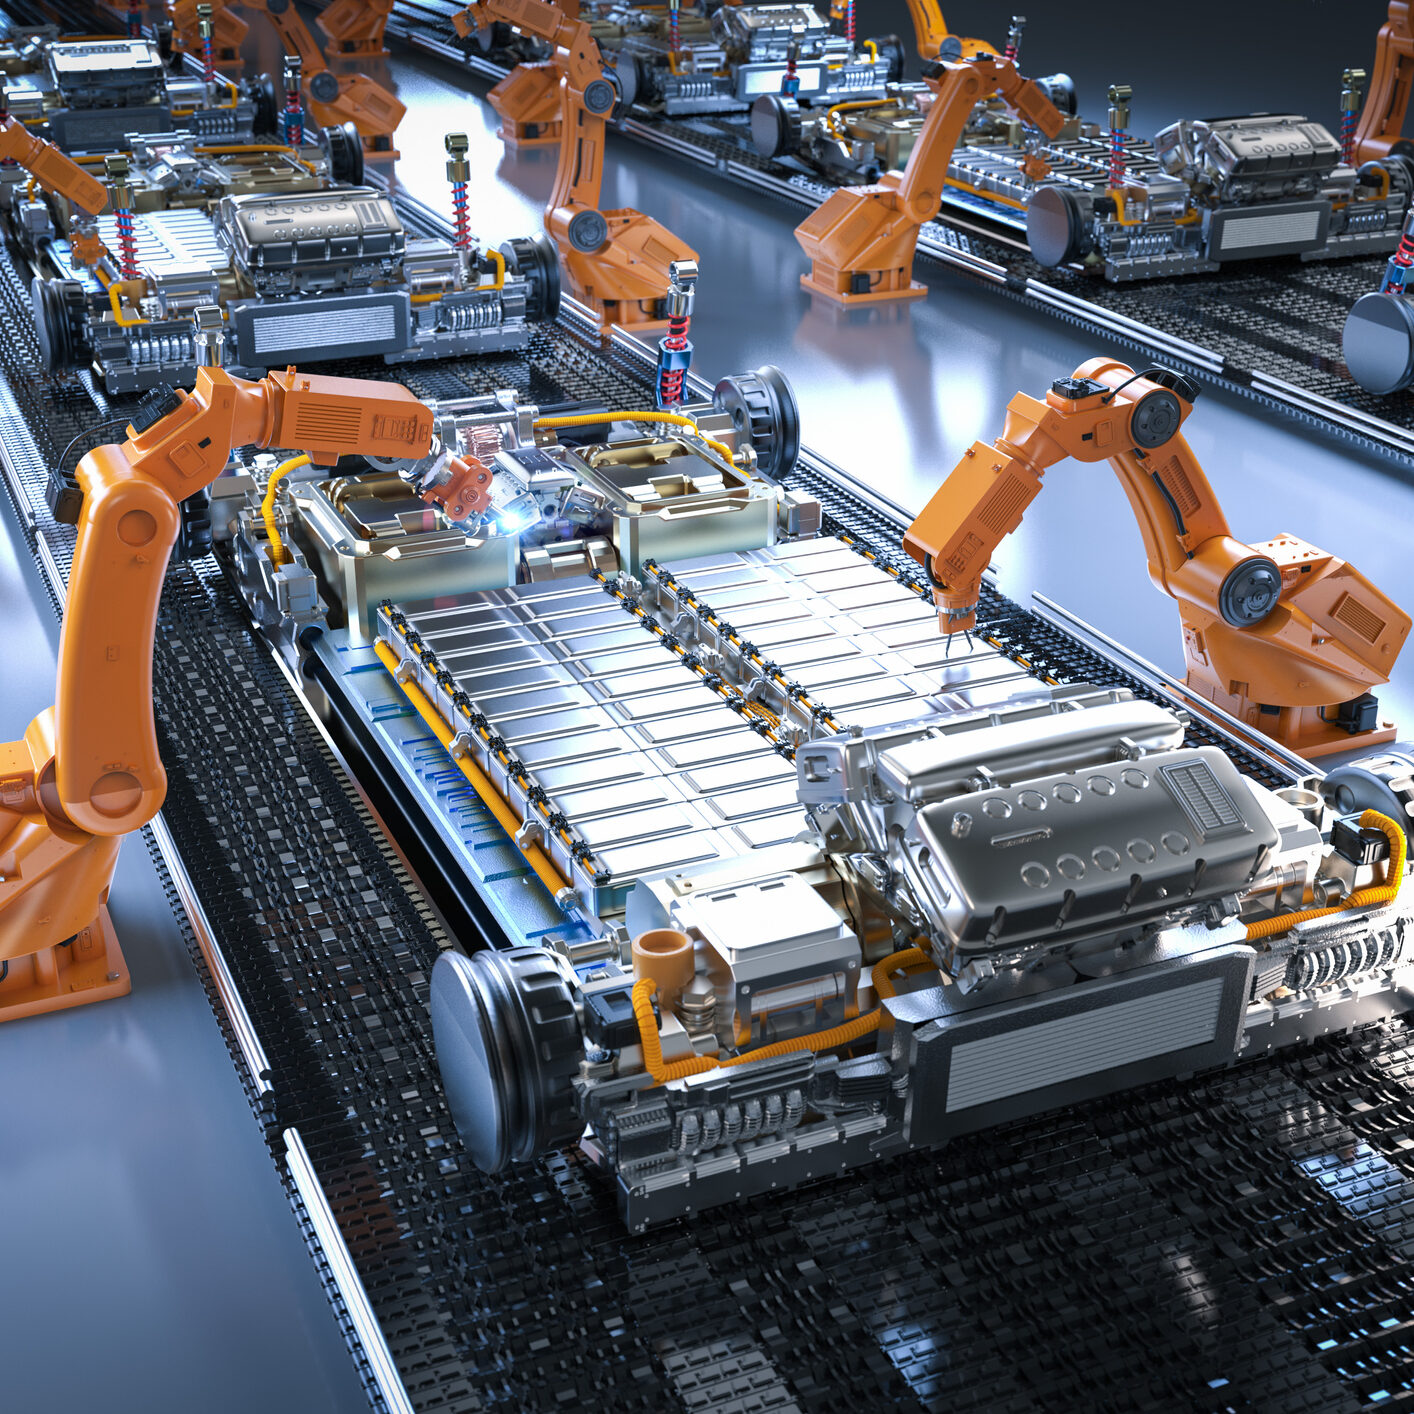 Automation automobile factory concept with 3d rendering robot assembly line with electric car battery cells module on platform